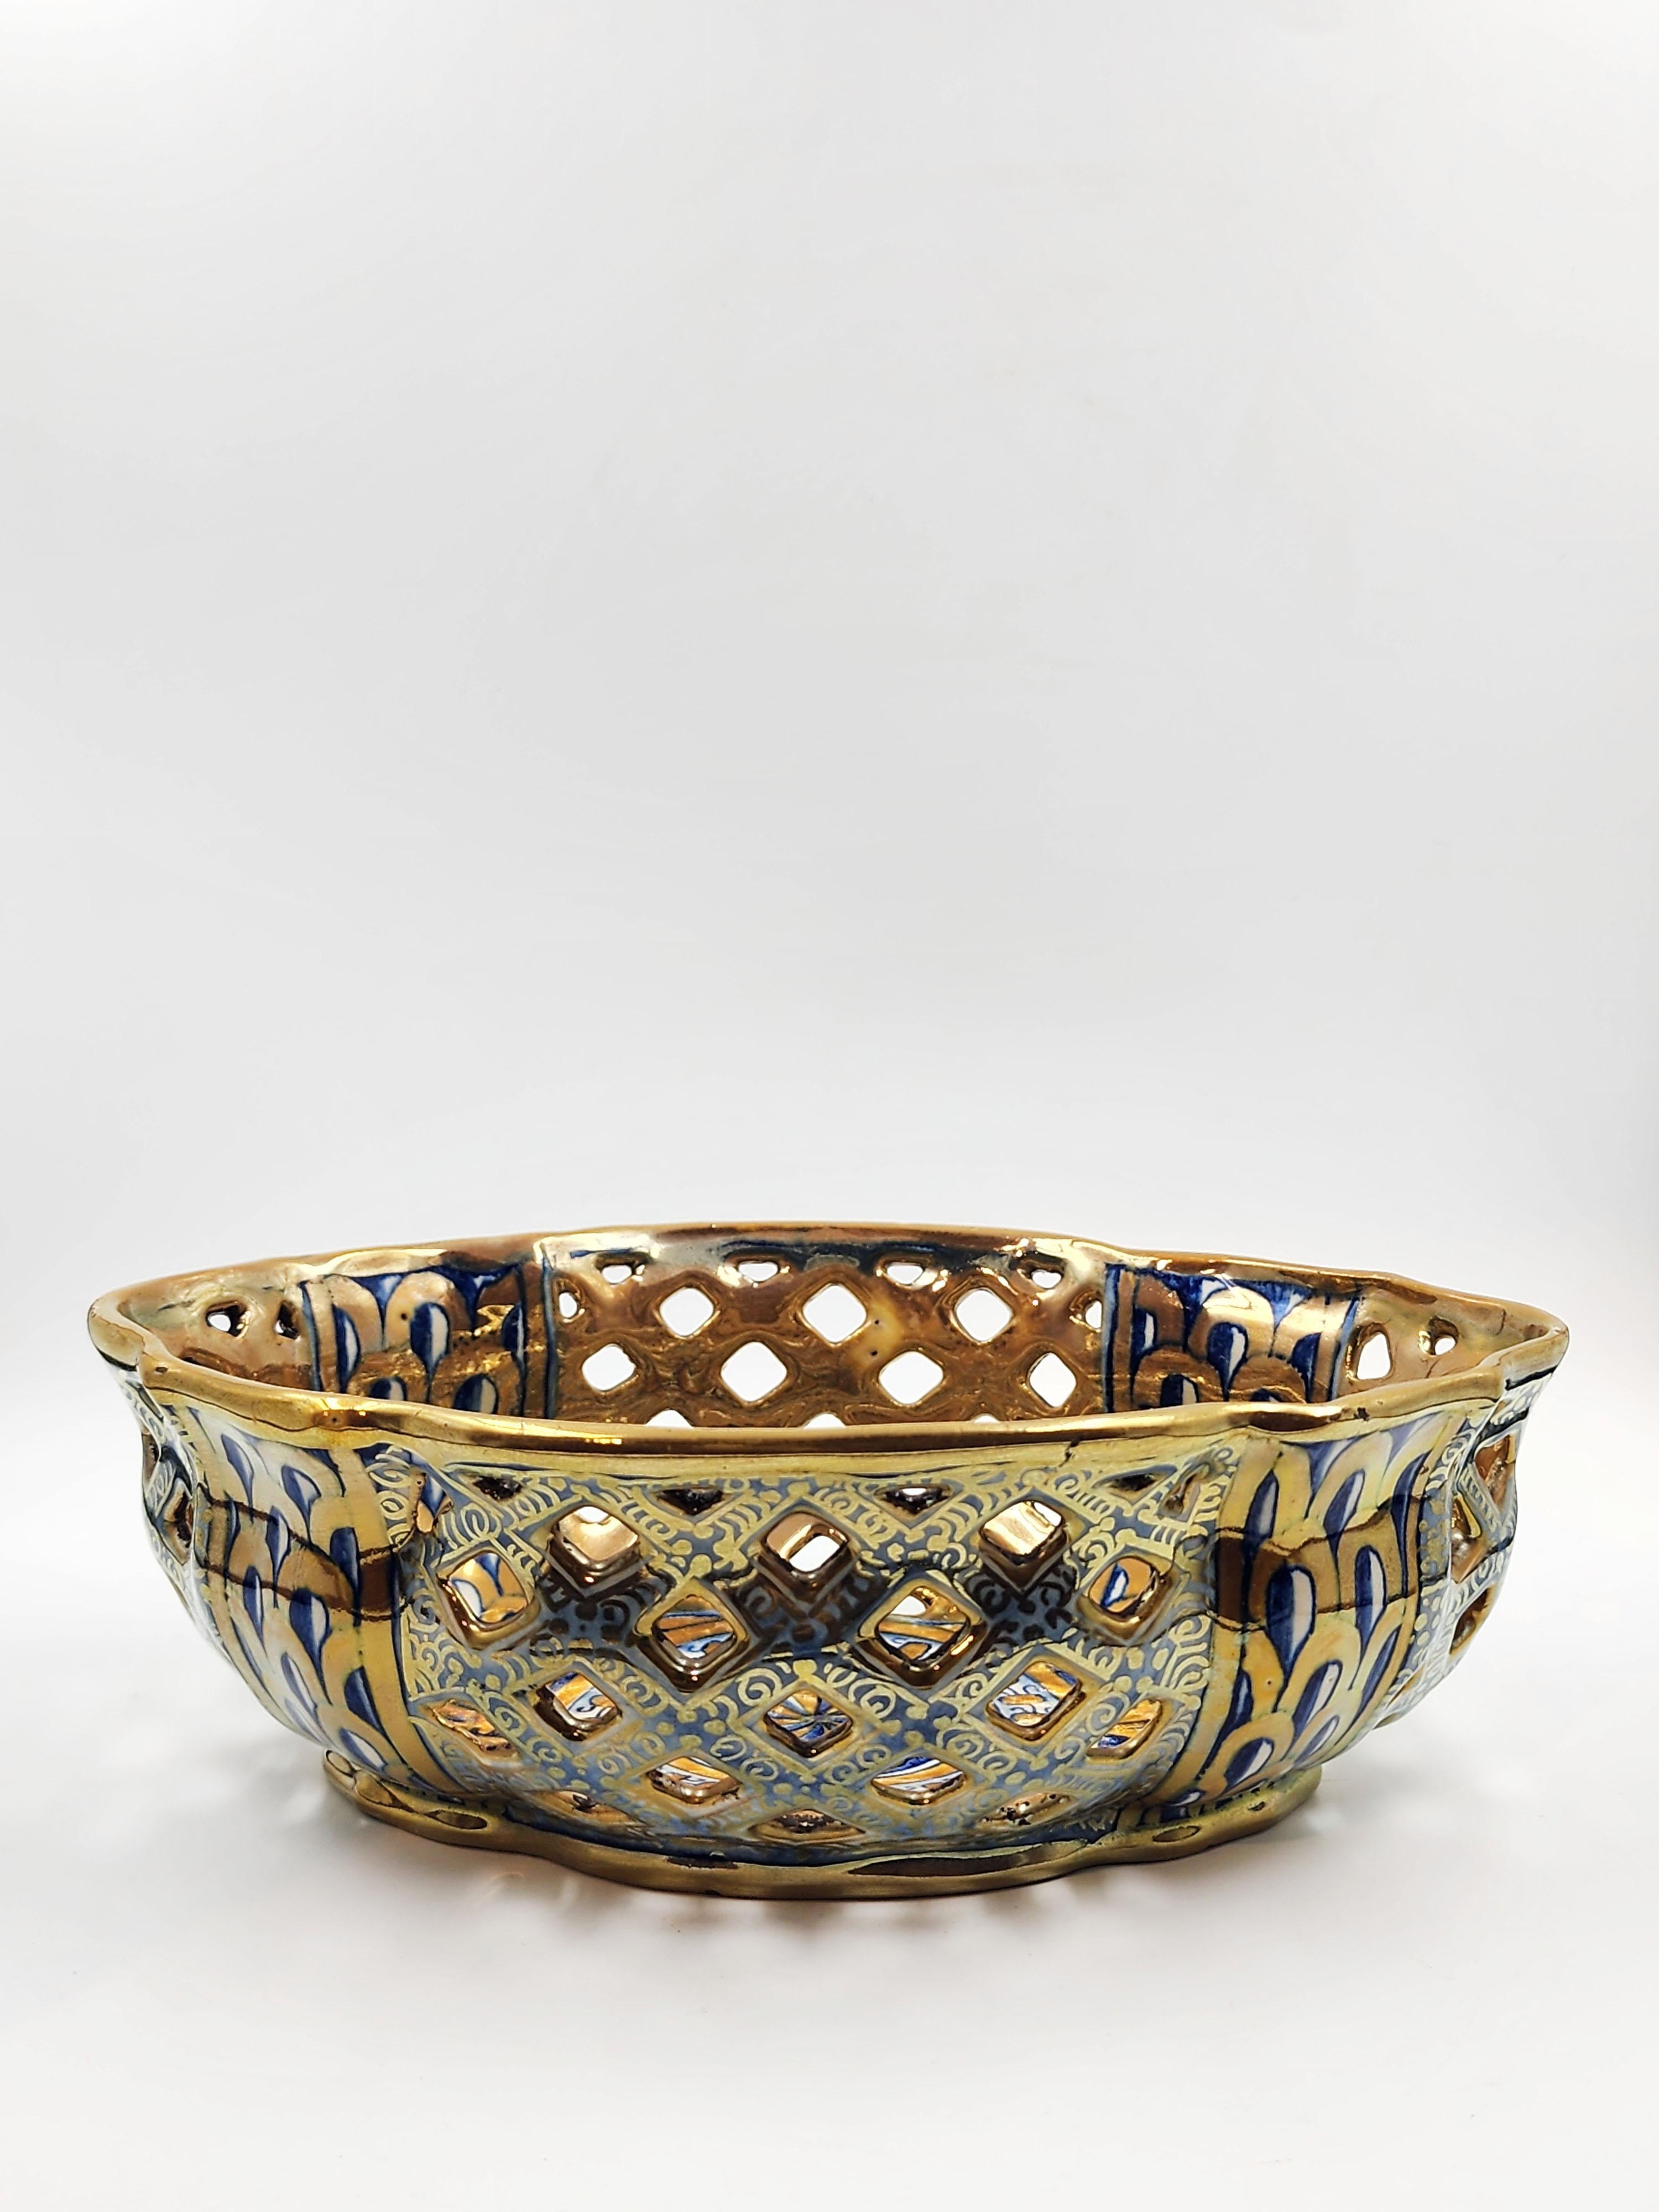 Italian ceramic center with Manufacture Cantagalli seal
Beautiful Italian ceramic centerpiece with a bright gold color that gains more presence in the center and with blue details and a geometric and symmetrical pattern showing detailed